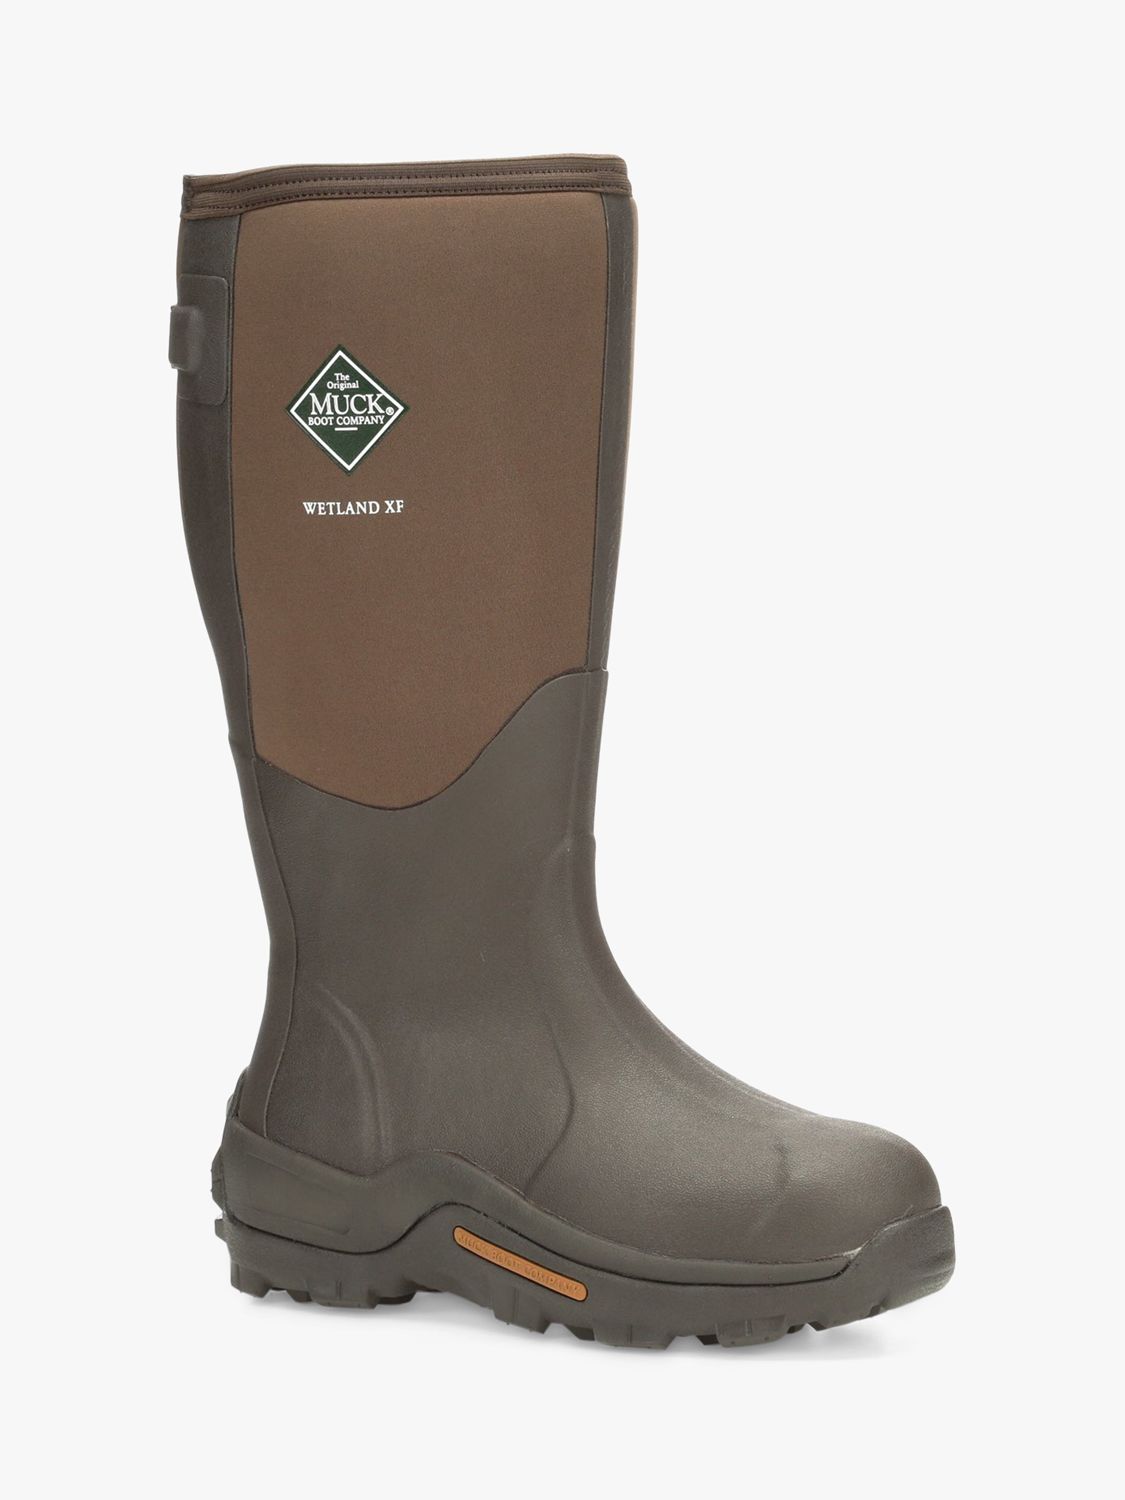 Muck Wetland XF Tall Wellington Boots, Brown at John Lewis & Partners